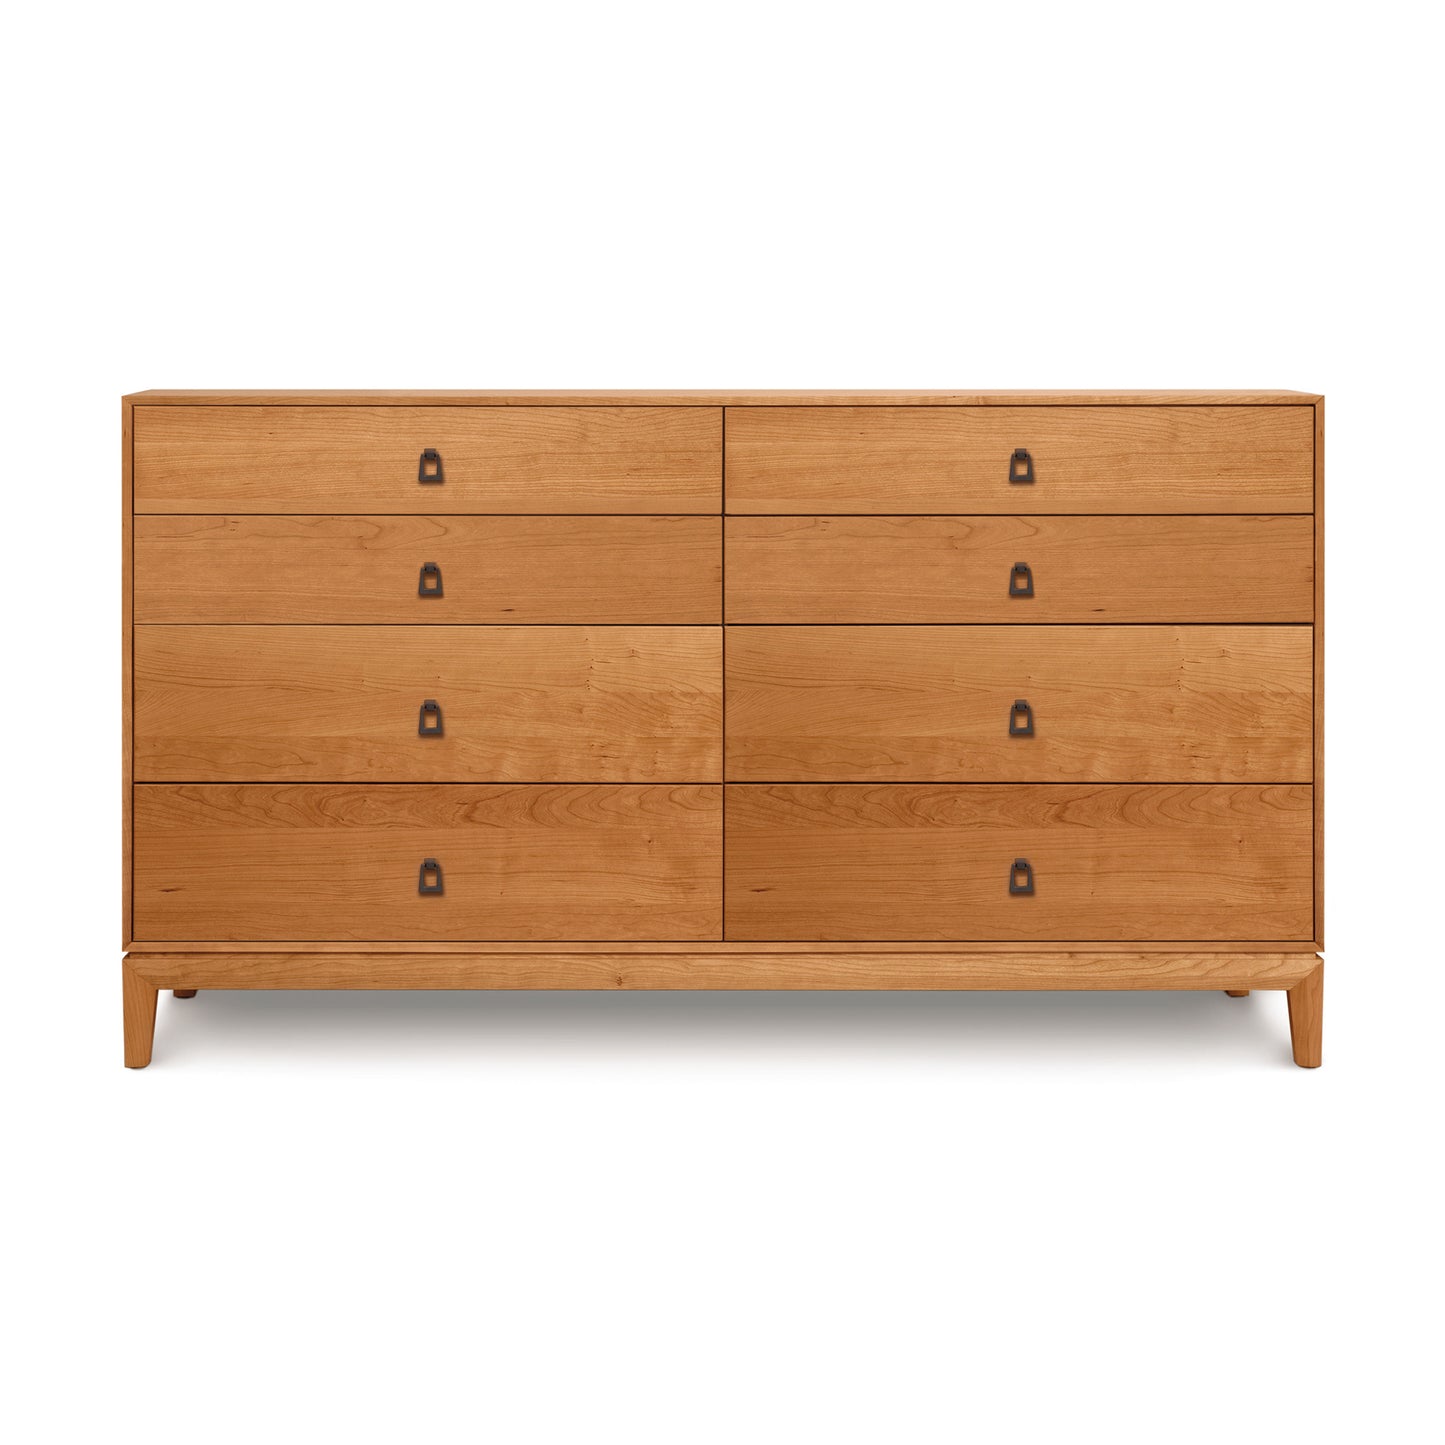 A mid-century modern style Copeland Furniture Mansfield 8-Drawer Dresser, featuring cherry wood construction with tapered legs, isolated on a white background.